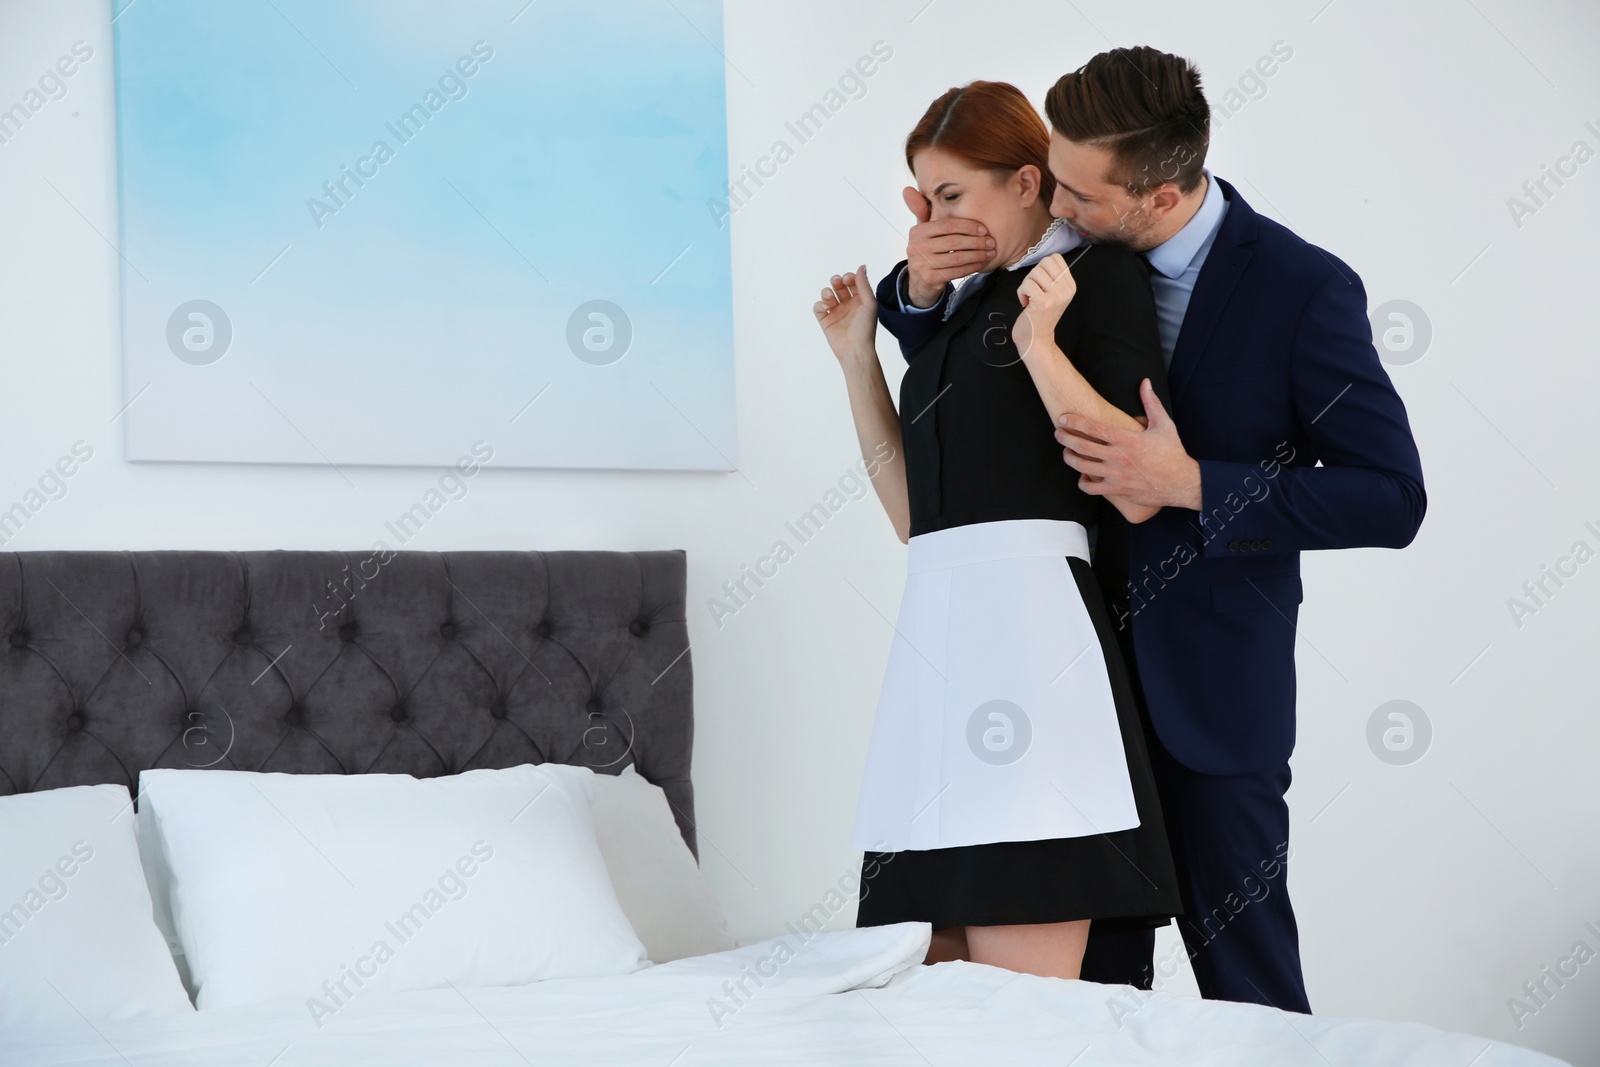 Photo of Man molesting chambermaid in bedroom. Sexual harassment at work